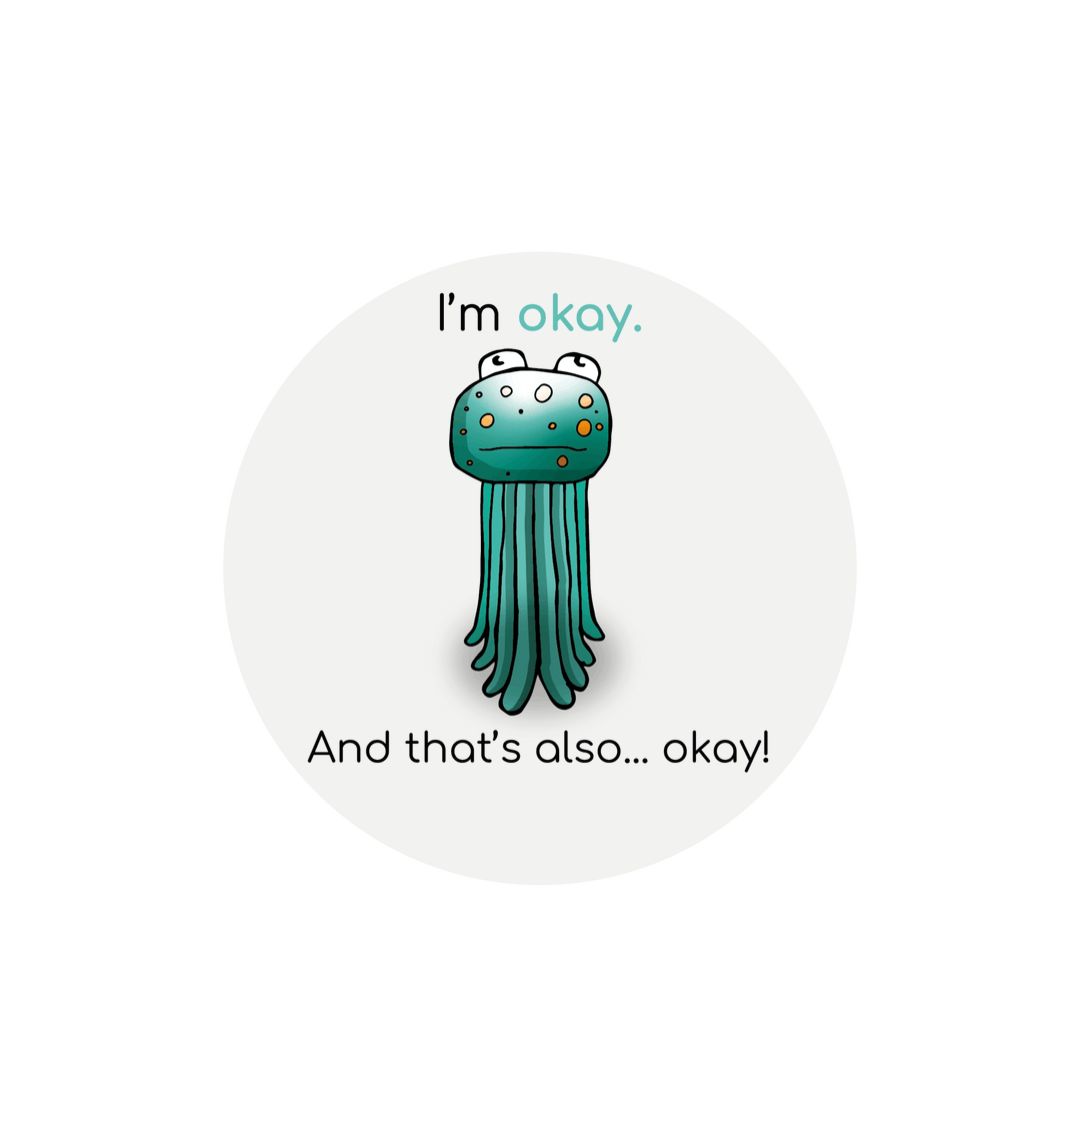 White \"I'm okay. And that's also... okay!\" Round Children's Emotions Sticker 60mm x 60mm